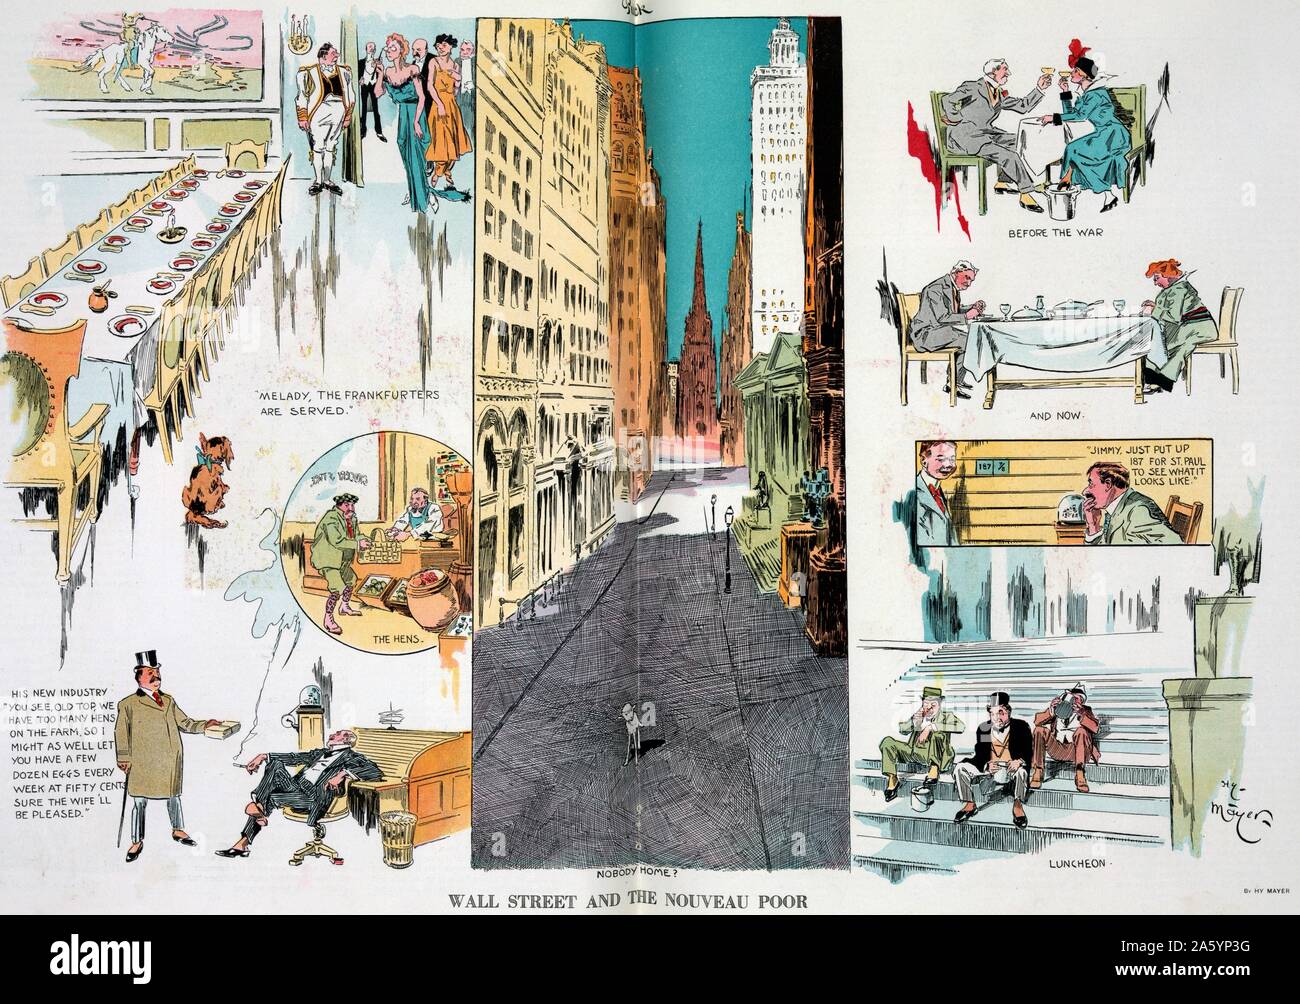 Wall Street and the nouveau poor by Henry Mayer. Published 1914 . Illustration shows a vignette cartoon with a bird's-eye view of Wall Street where an innocent lamb is standing in the middle of the deserted financial district. The surrounding vignettes show a banquet of hot dogs; a man buying eggs cheap, then trying to sell them to a stockbroker for 50 cents a dozen; an elderly man drinking wine with a beautiful young woman 'Before the War', 'And Now' disgruntled and at home with his wife; and three businessmen sitting on steps outside Federal Hall, quaffing lunch from a 'full-dinner pail'. Stock Photo